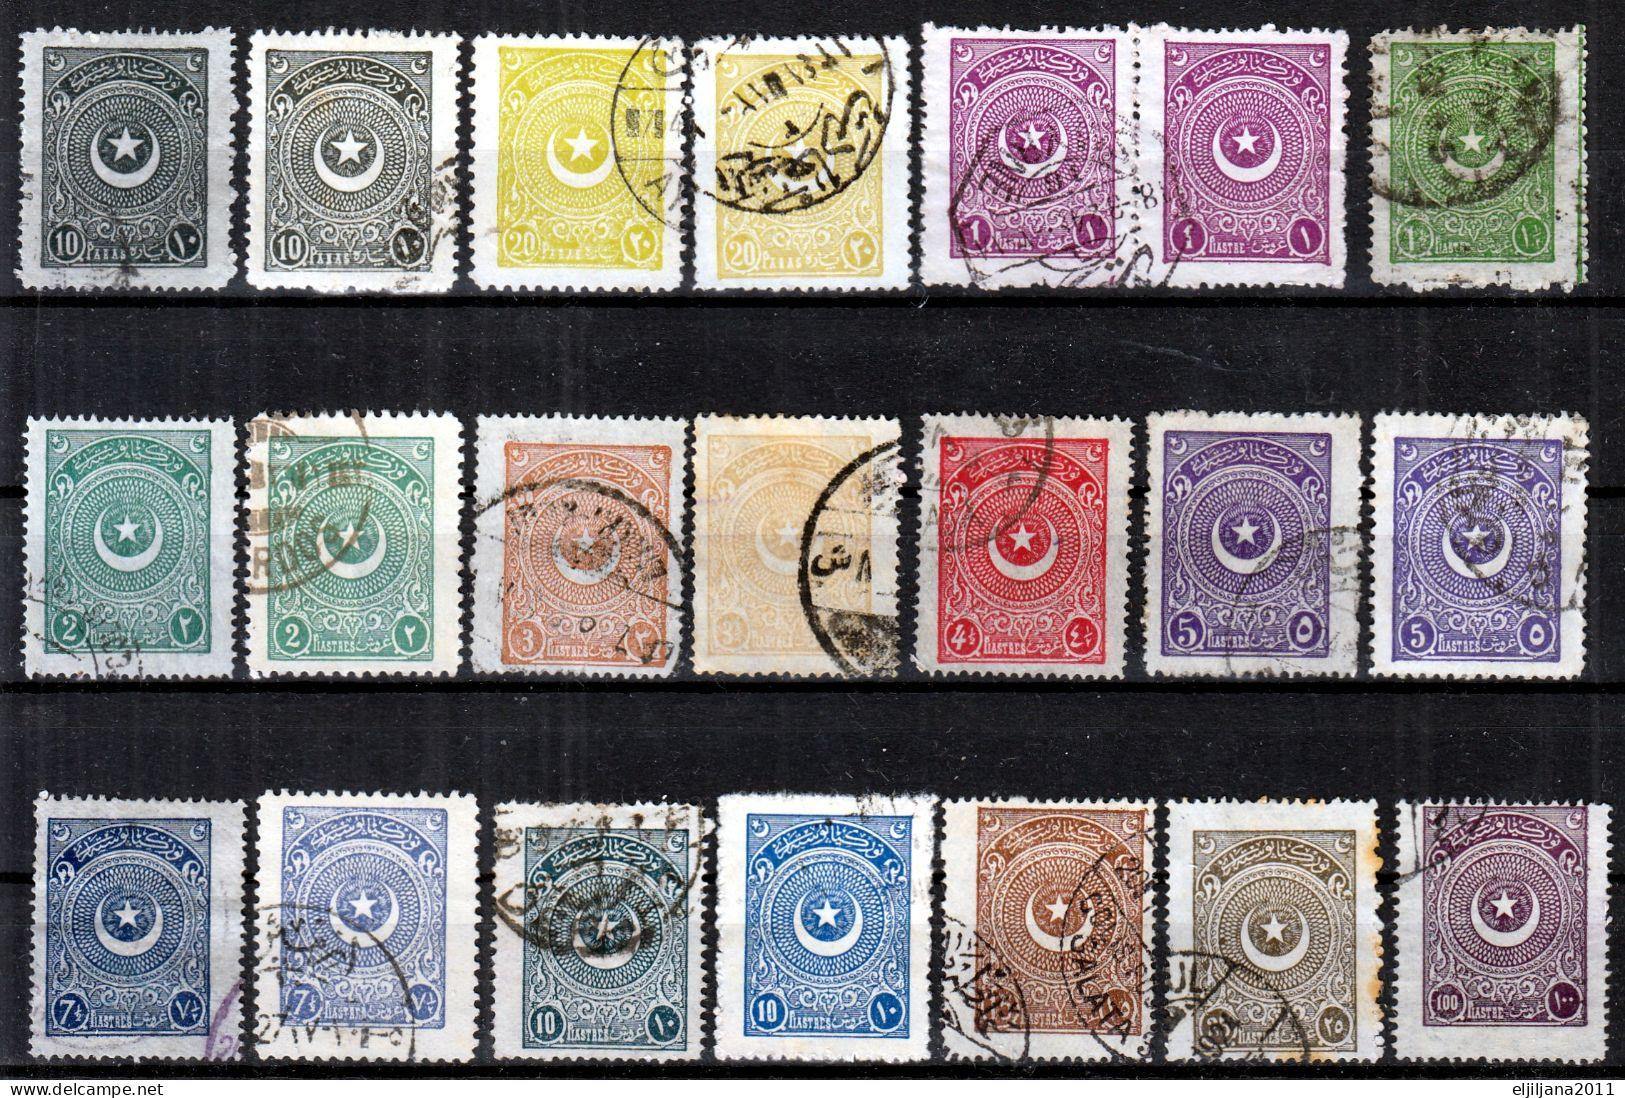 Action !! SALE !! 50 % Turkey / Türkei 1923 - 1925 ⁕ Star And Crescent In A Circle ⁕ 21v Used / Shades - Different Perf. - Used Stamps